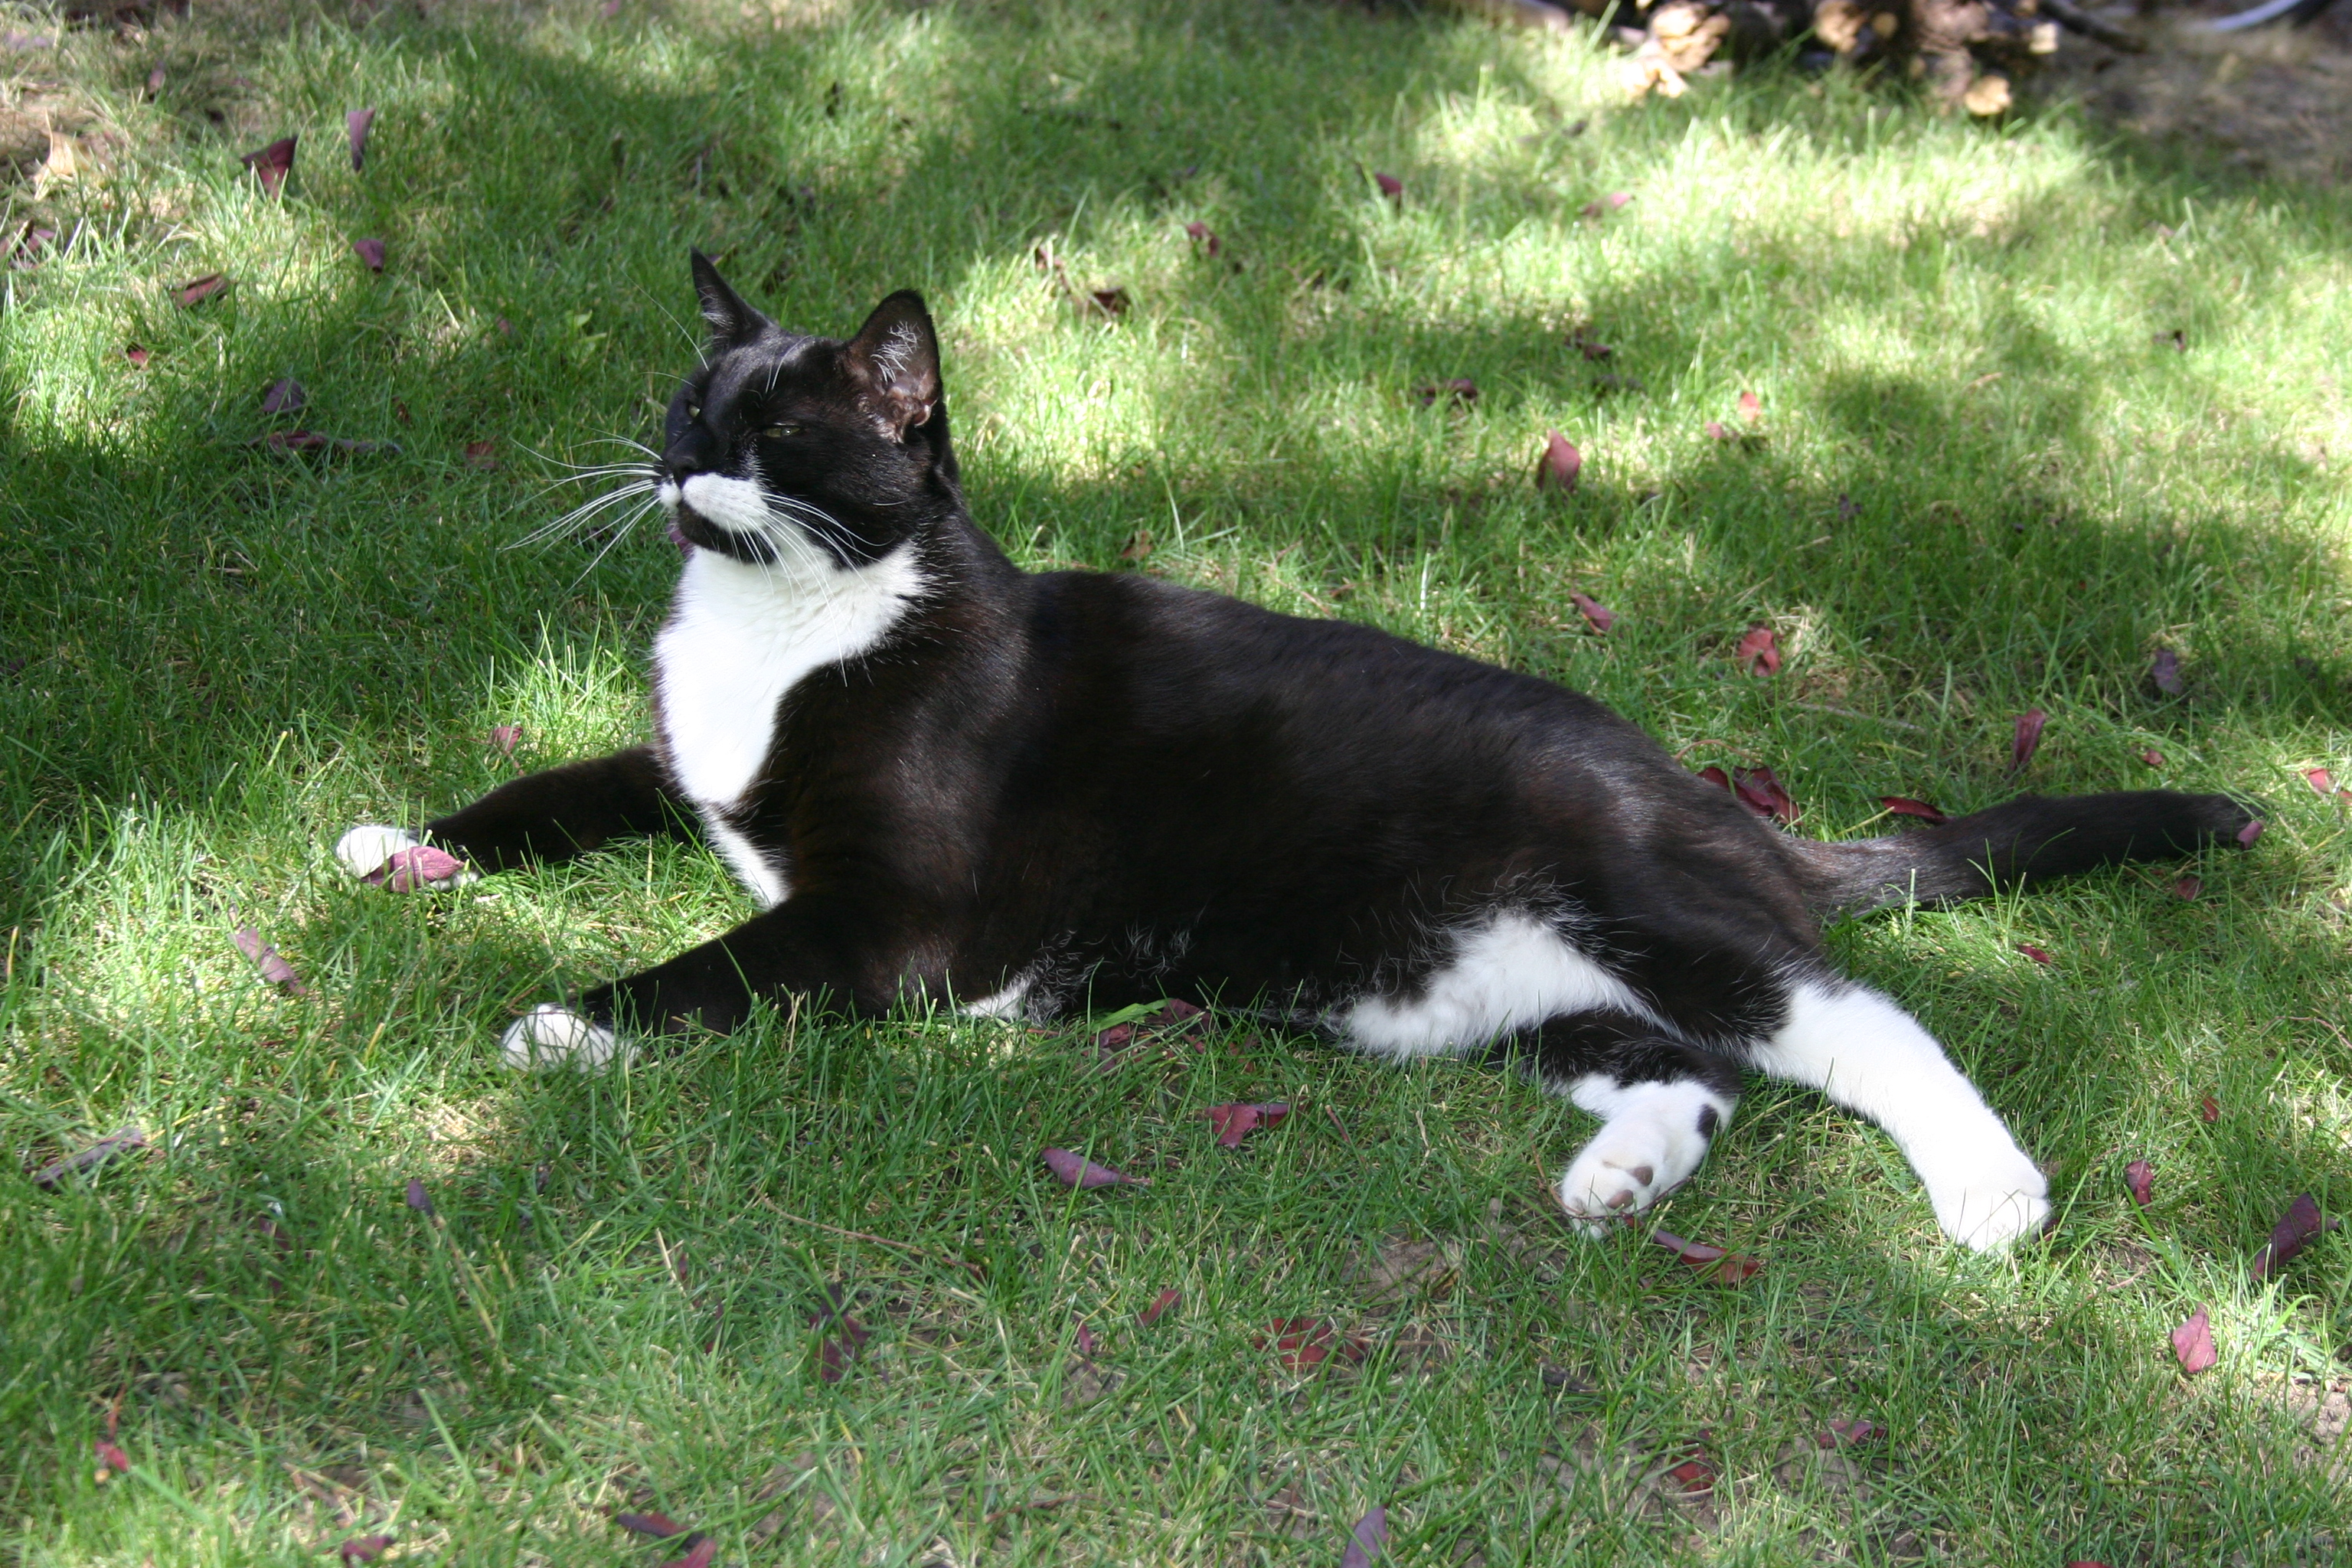 The majestic tuxedo cat in his natural habitat (the lawn). 